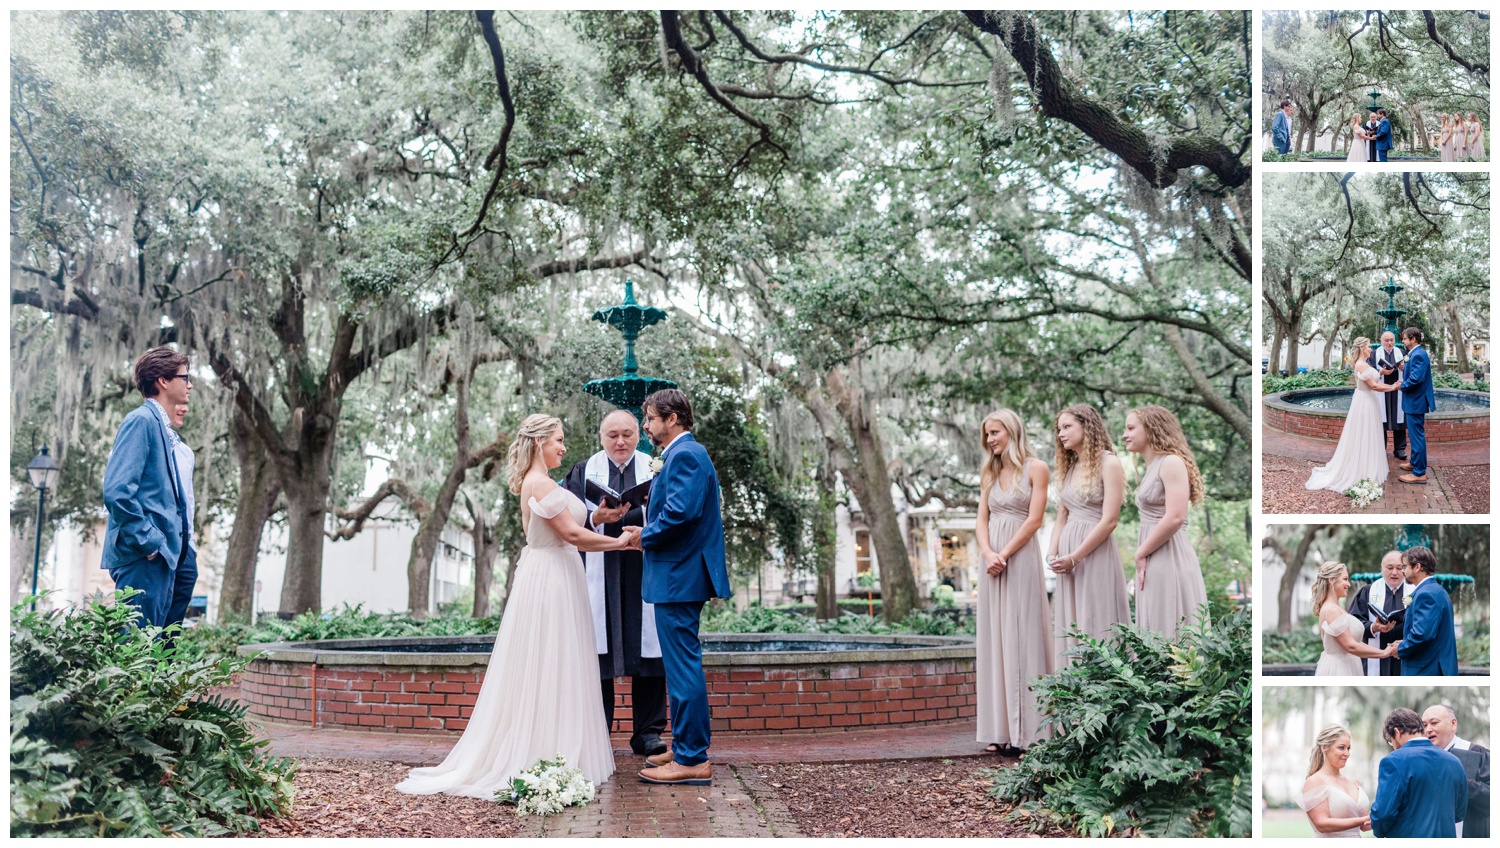 Ceremony at Lafayette Square with The Savannah Elopement Package